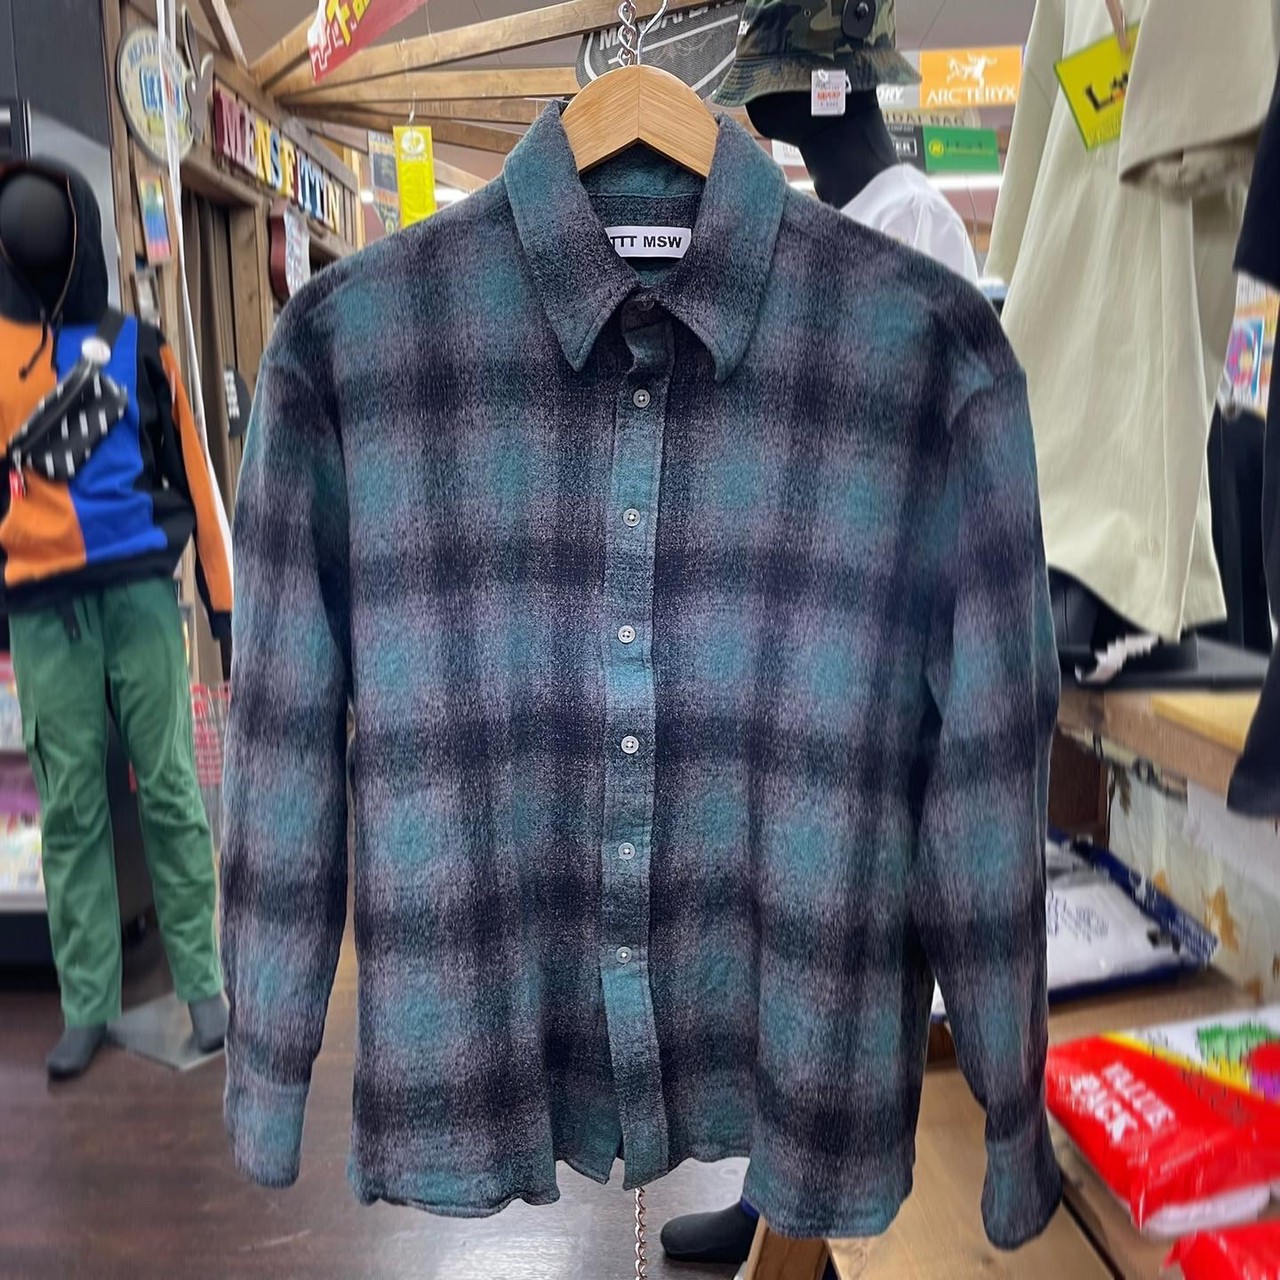 ttt msw 21AW wool cashmere check shirt - o2analises.com.br